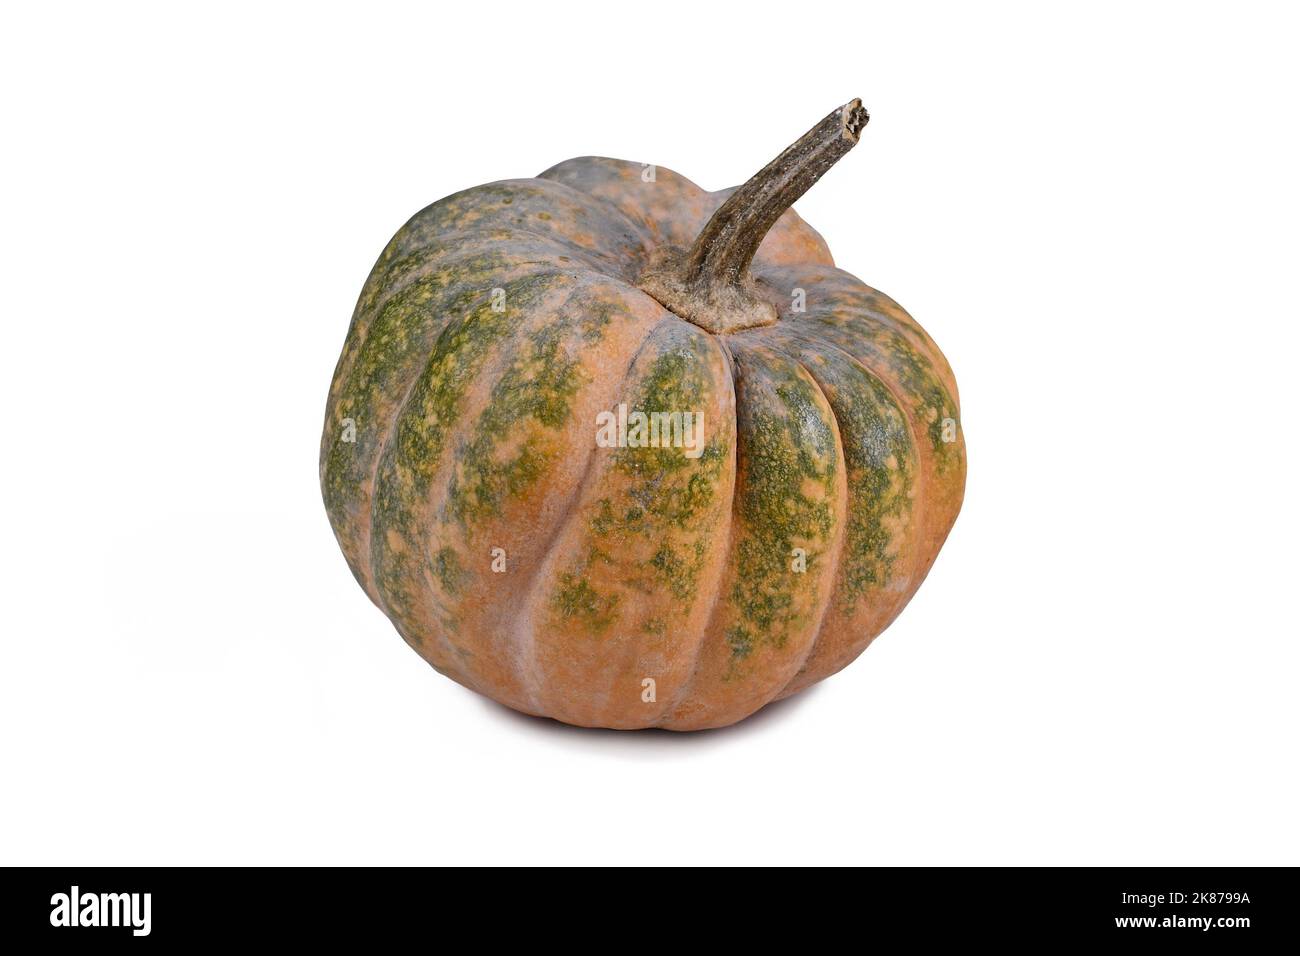 Green and orange 'Musquee de Provence' pumpkin on white background Stock Photo